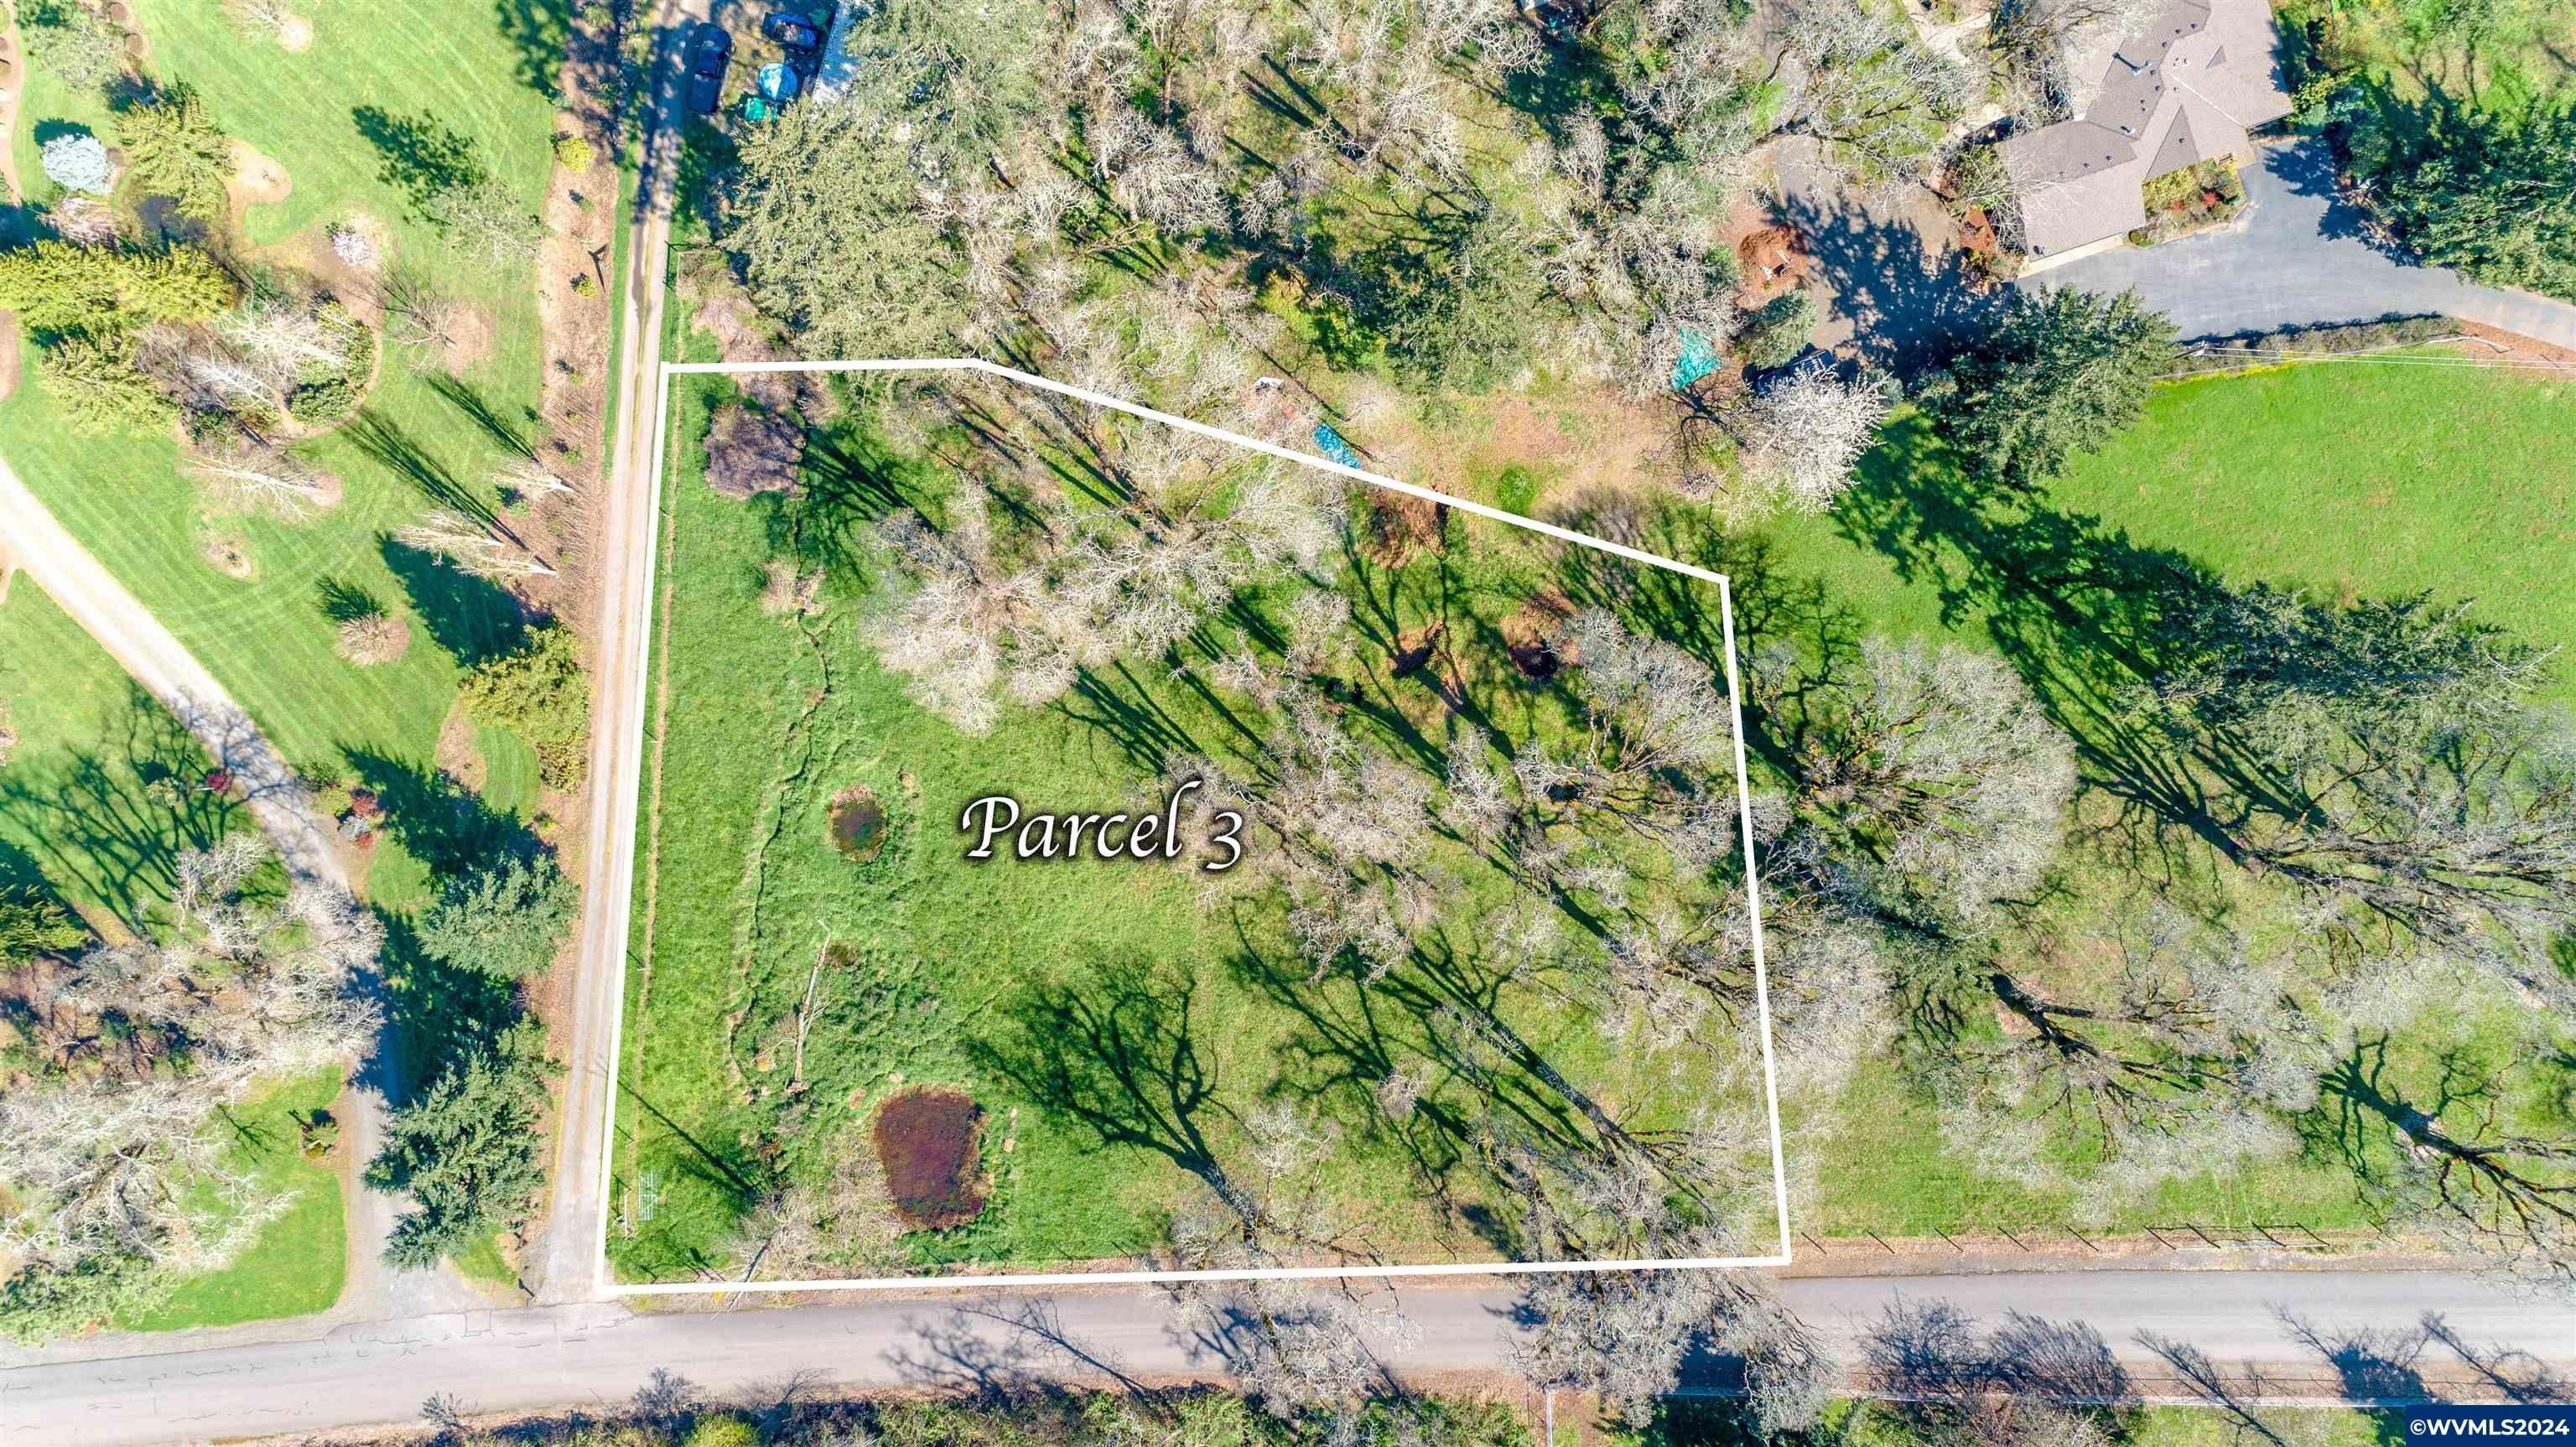 39. 8231 Macleay (3 Parcels) Rd SE